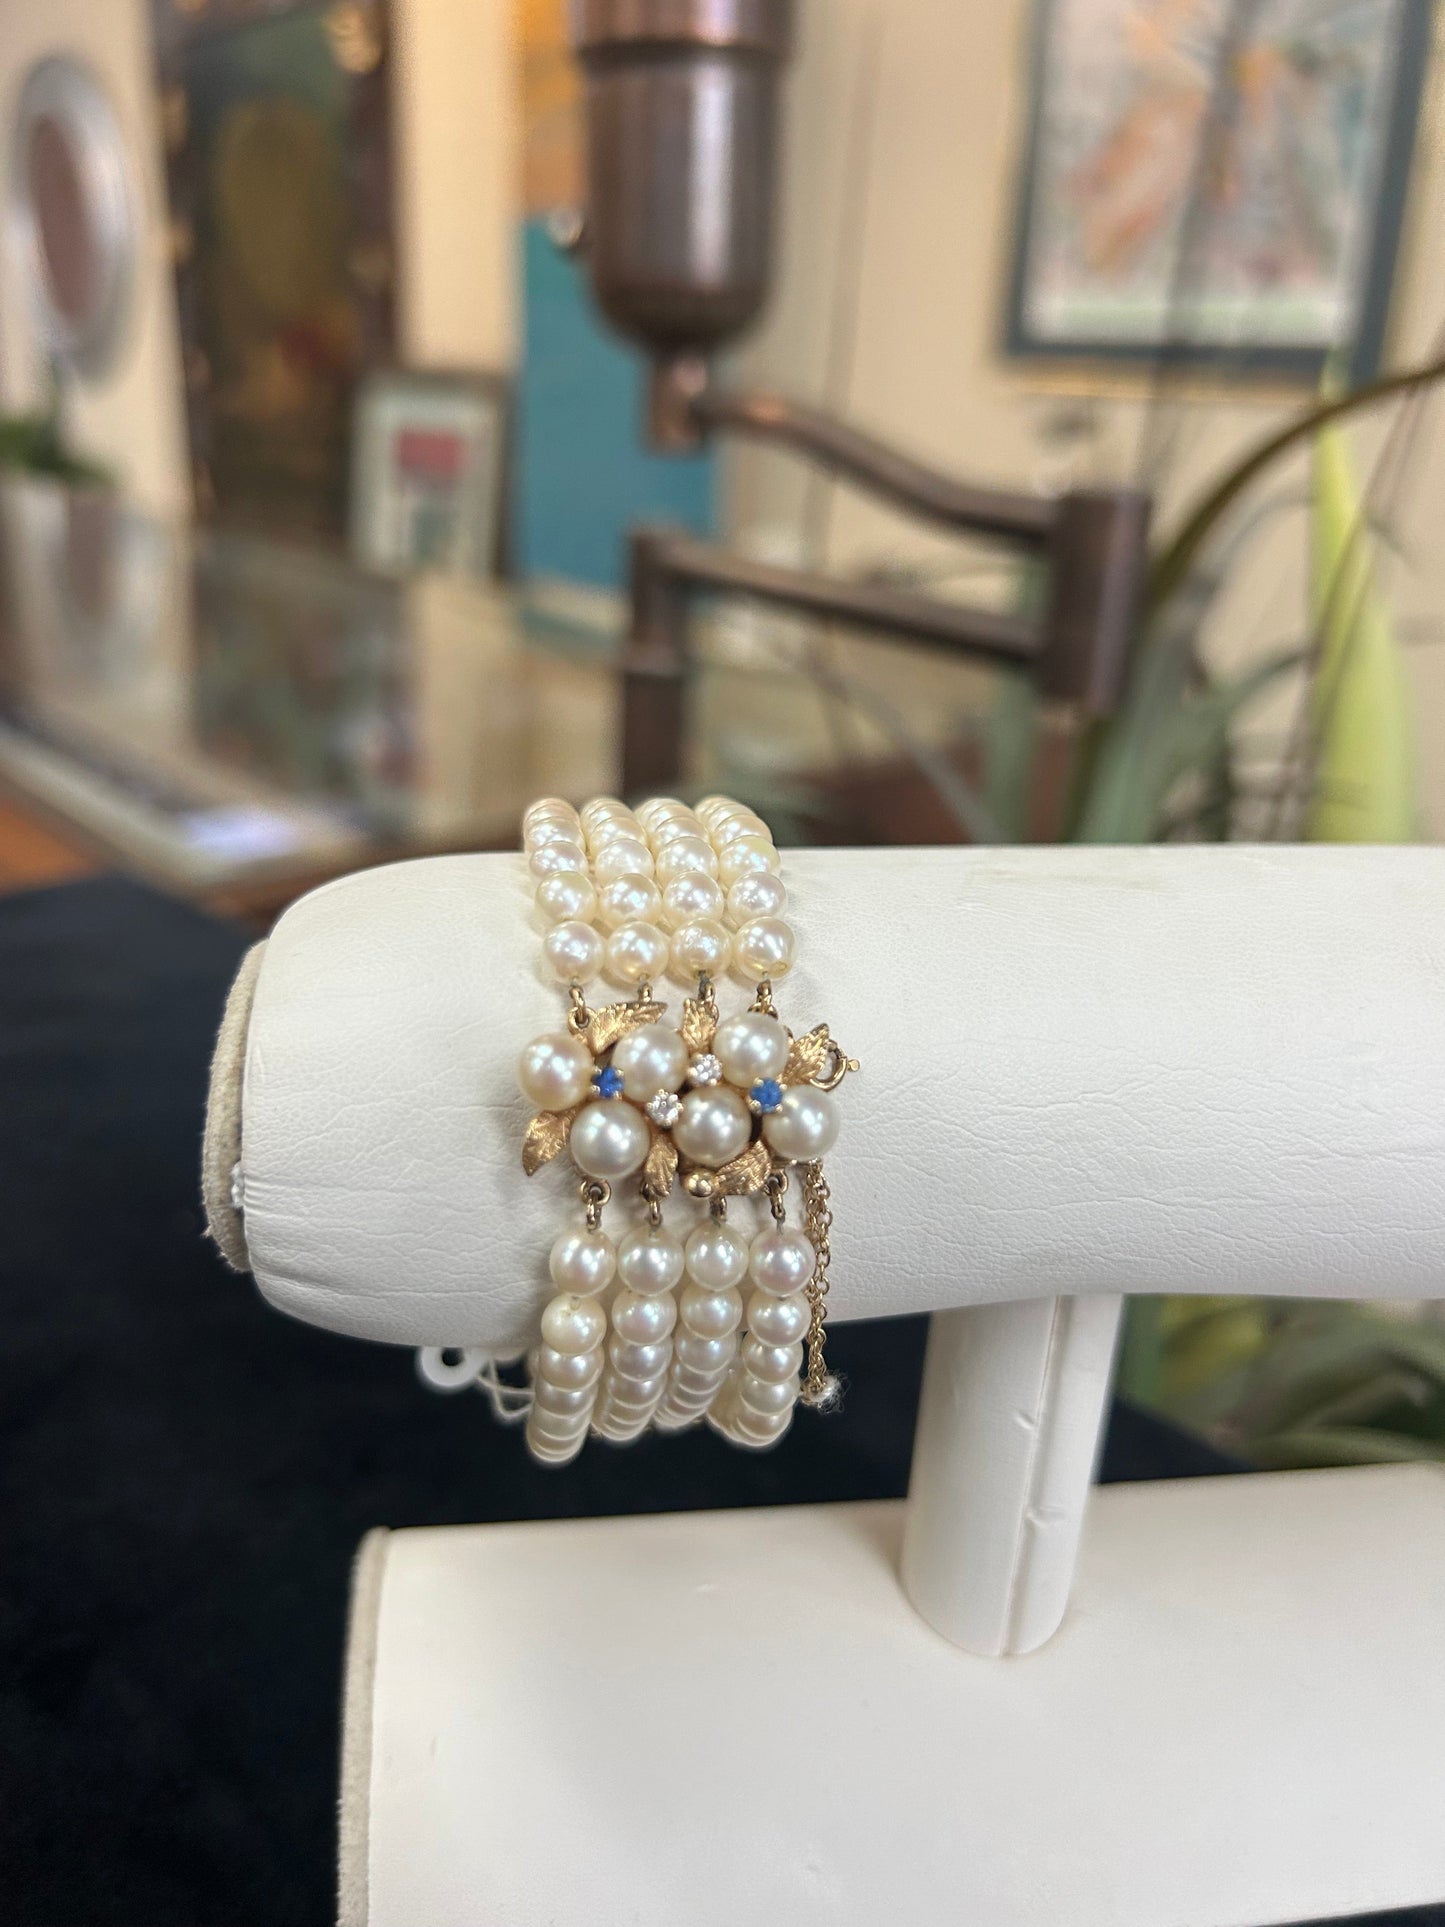 Four Strand Pearl Bracelet with Sapphires and Diamonds